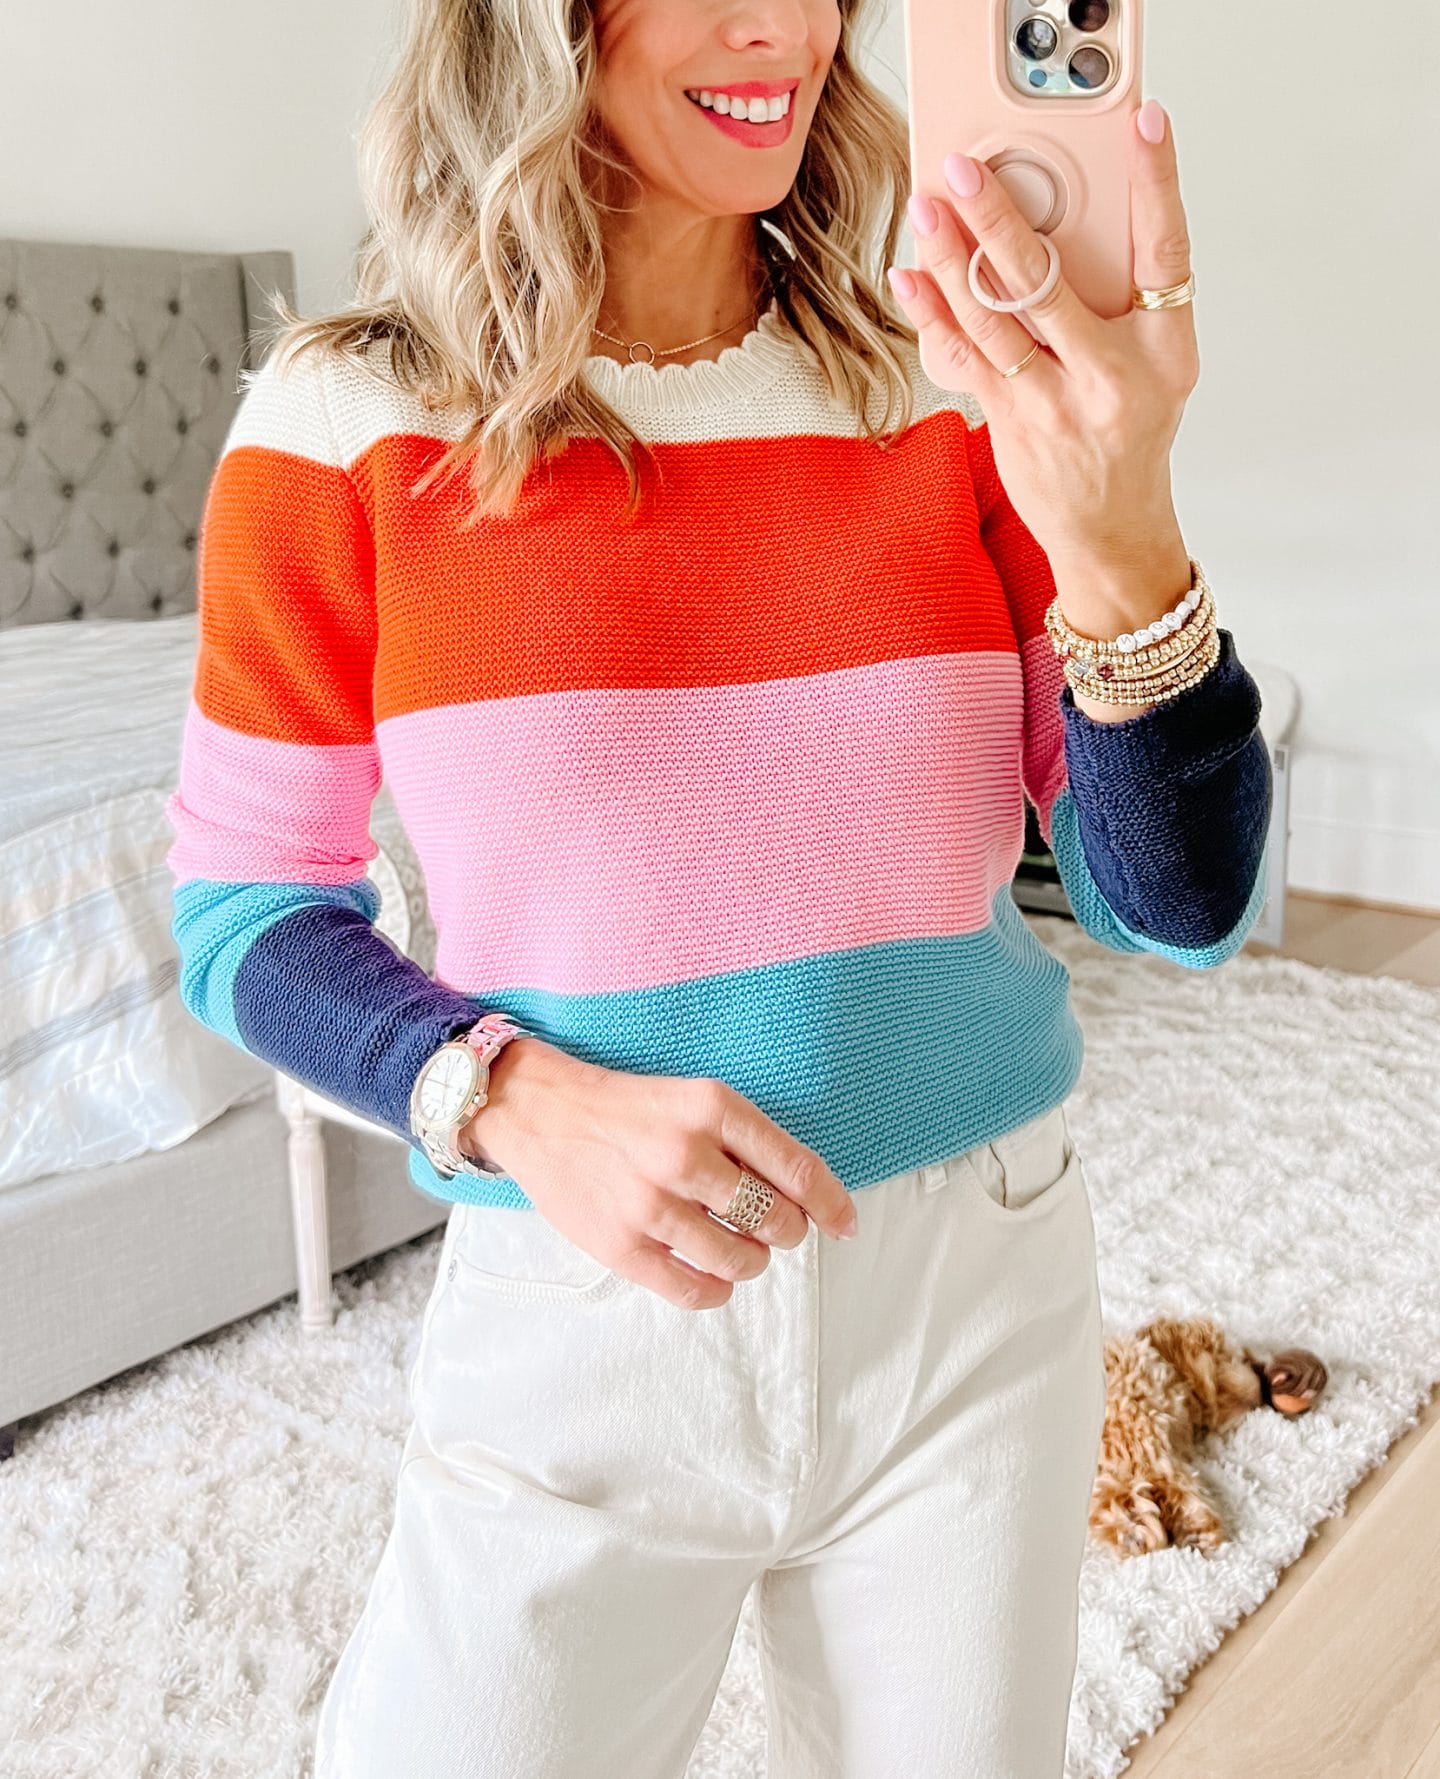 Colorblock Sweater, White Jeans, Wedges 